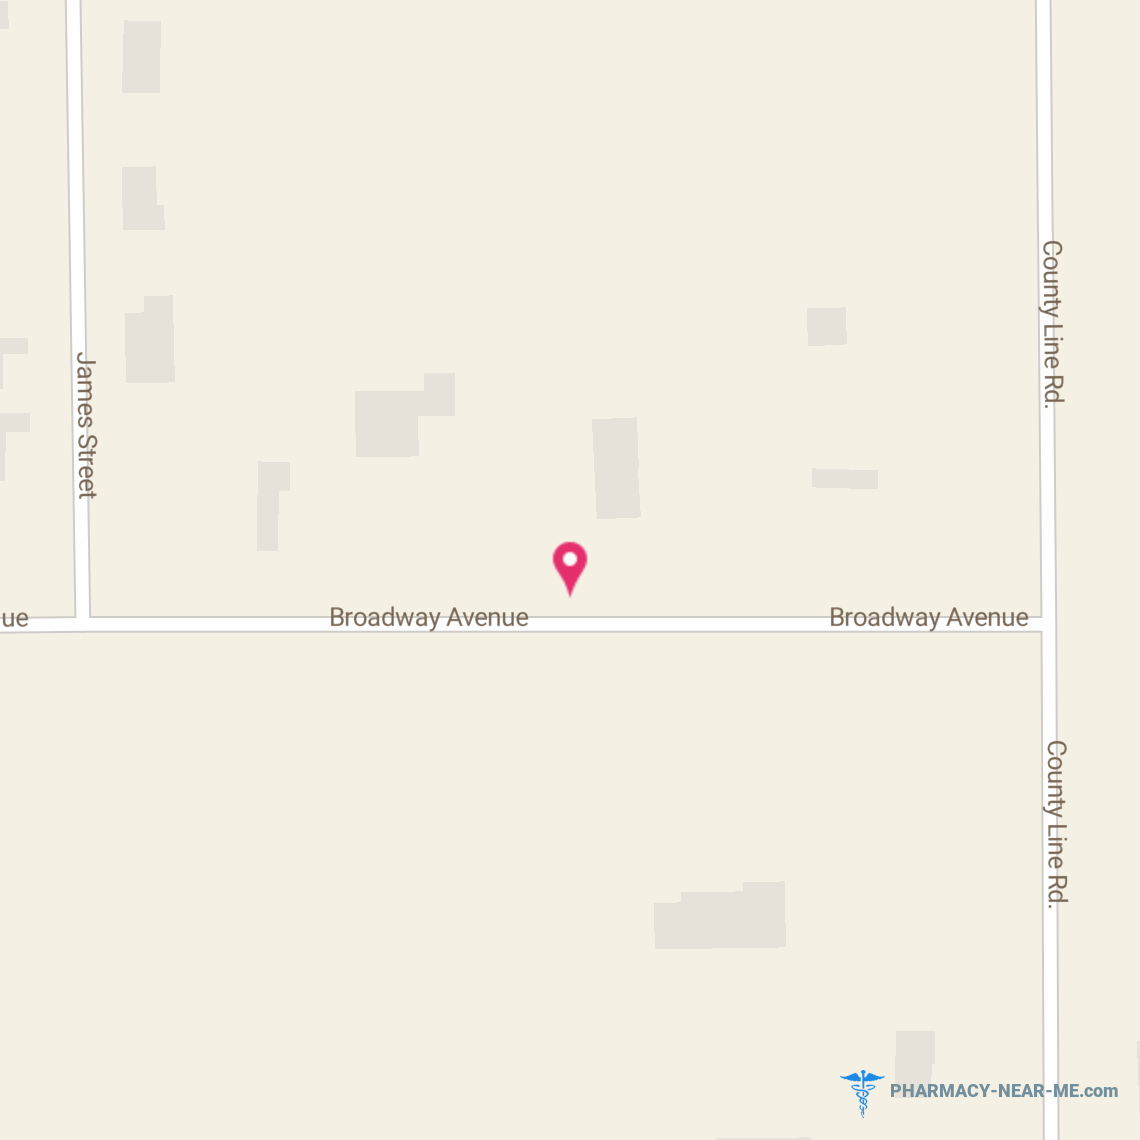 BROOKSHIRE BROTHERS PHARMACY - Pharmacy Hours, Phone, Reviews & Information: 204 Broadway Avenue, Winnie, Texas 77665, United States